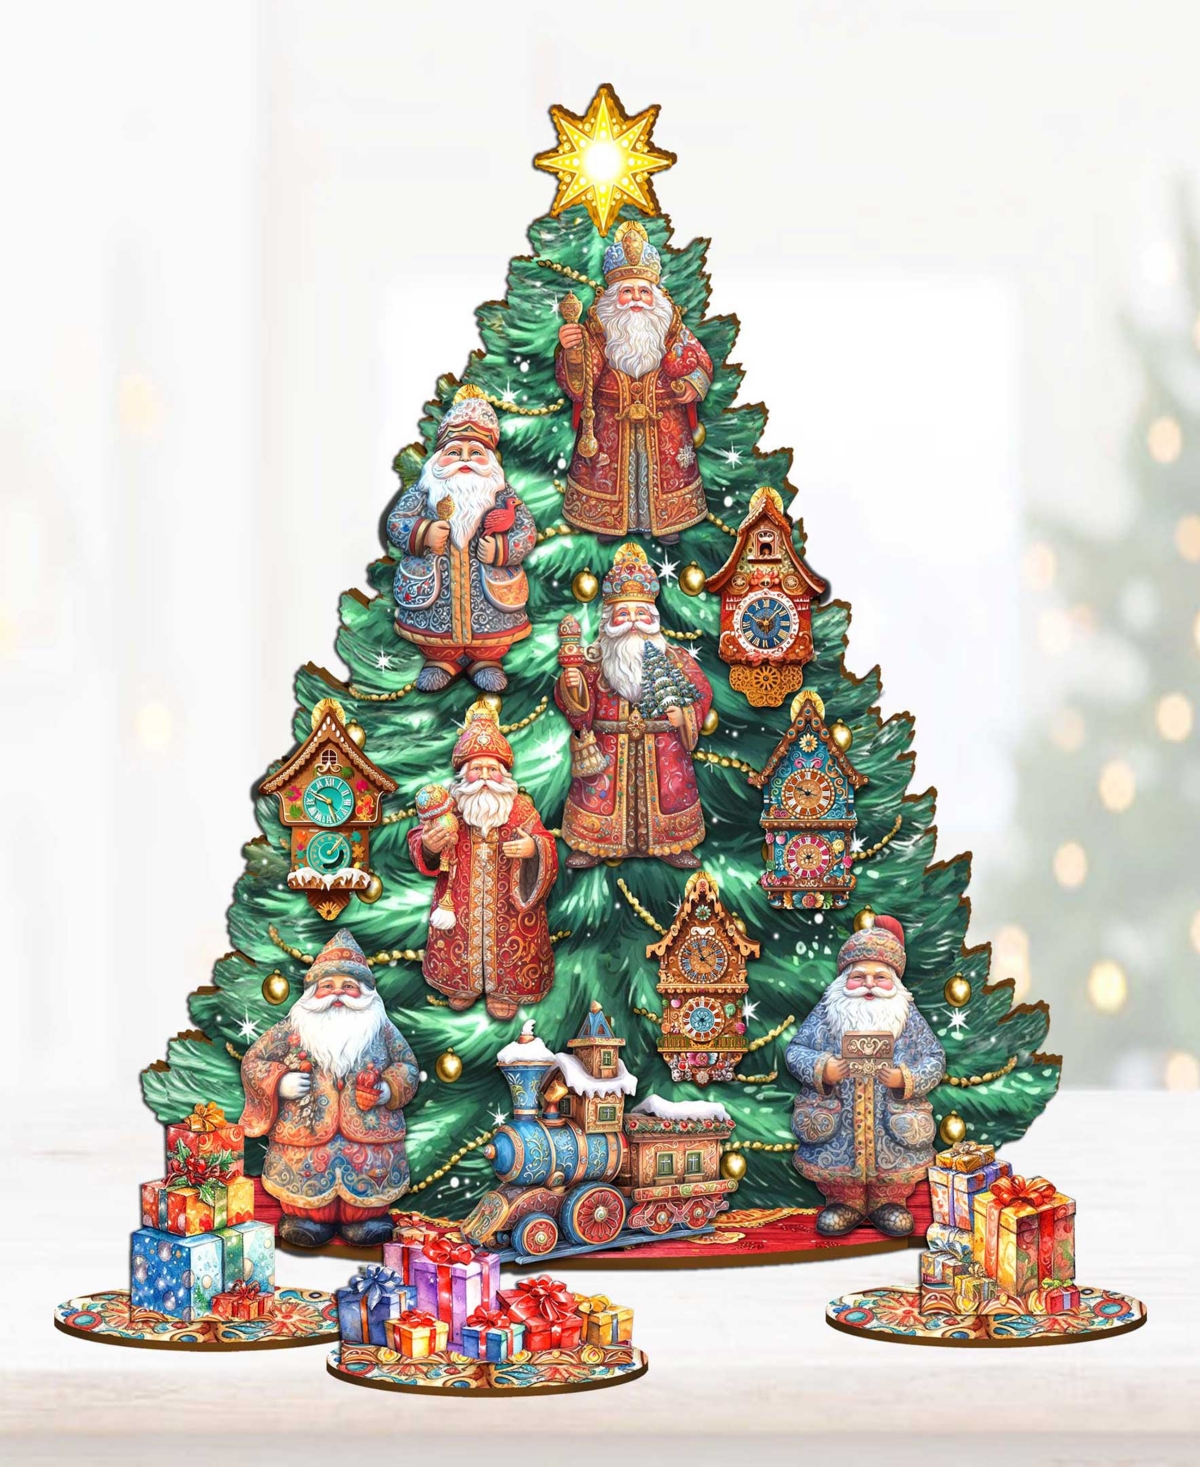 Shop Designocracy Santa Christmas Arrival Themed Wooden Christmas Tree With Ornaments Set Of 13 G. Debrekht In Multi Color